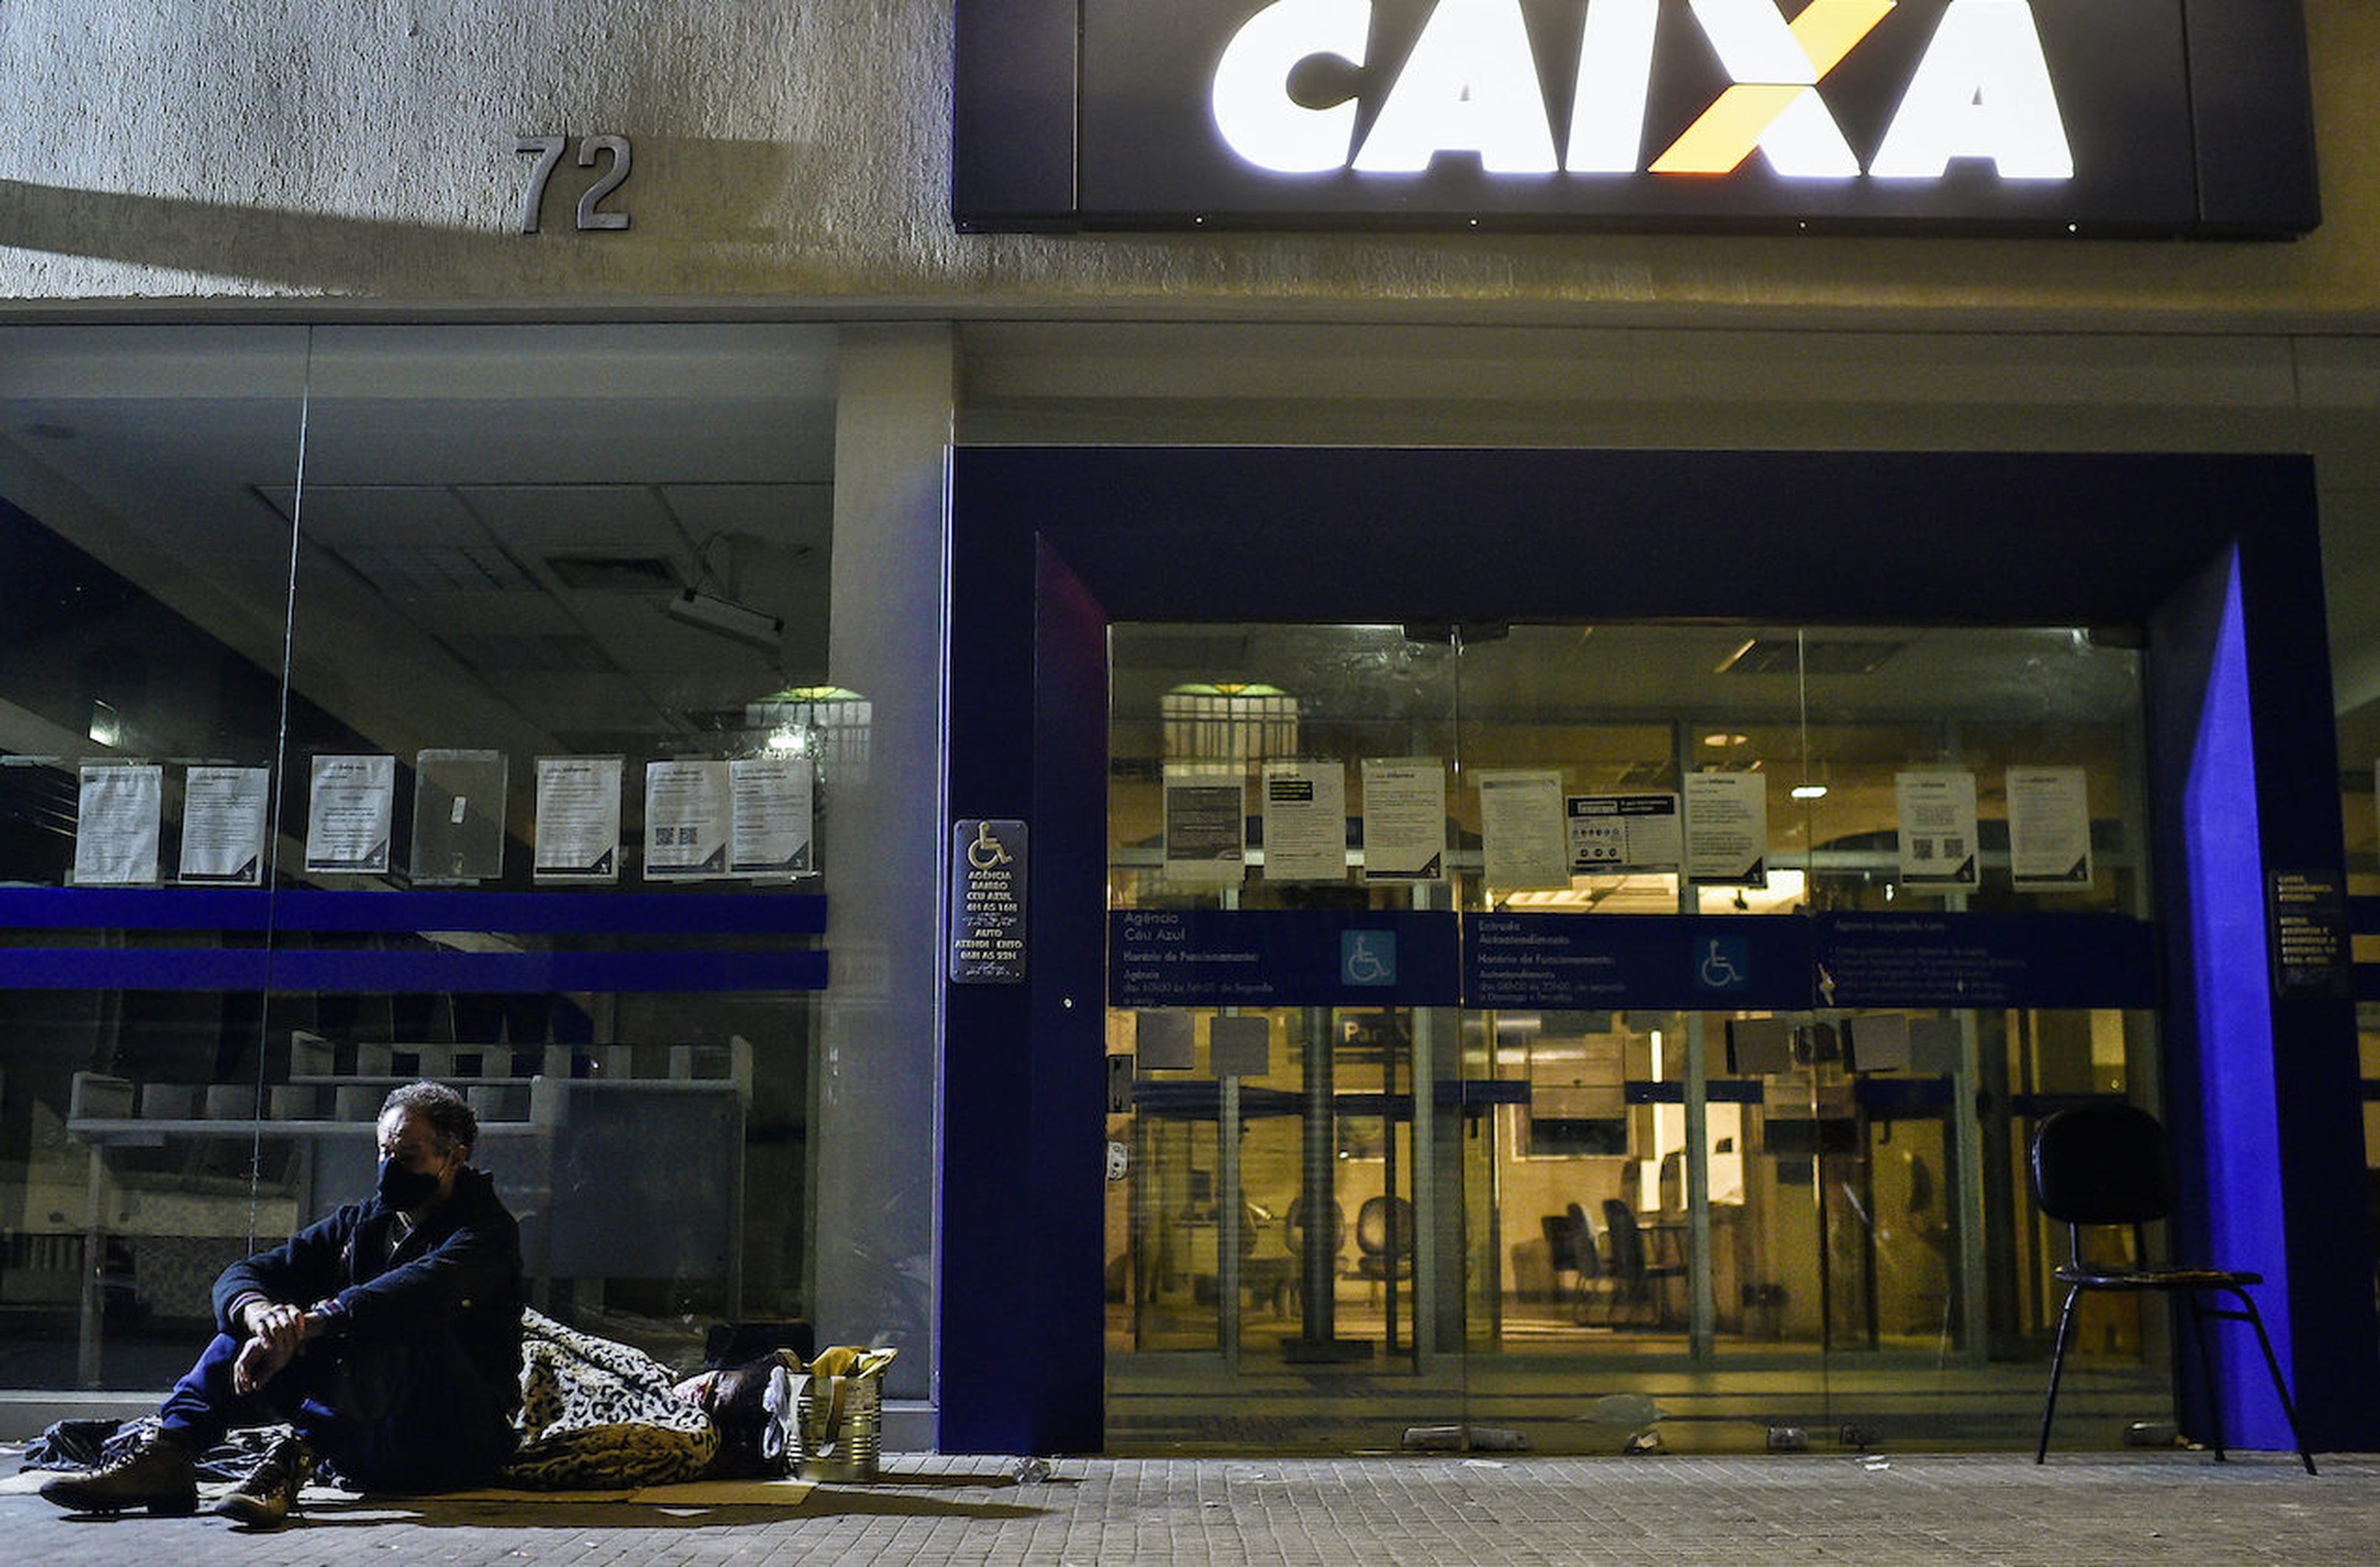 People sleep waiting in line outside a Caixa Economica Federal bank to receive urgent government benefit amidst the COVID-19 struggles in Belo Horizonte, Brazil. Beyond the pandemic, banks combat the Brazil-based Guildma cybercriminal gang that developed a new Android-based trojan that has now gone global. (Pedro Vilela/Getty Images)